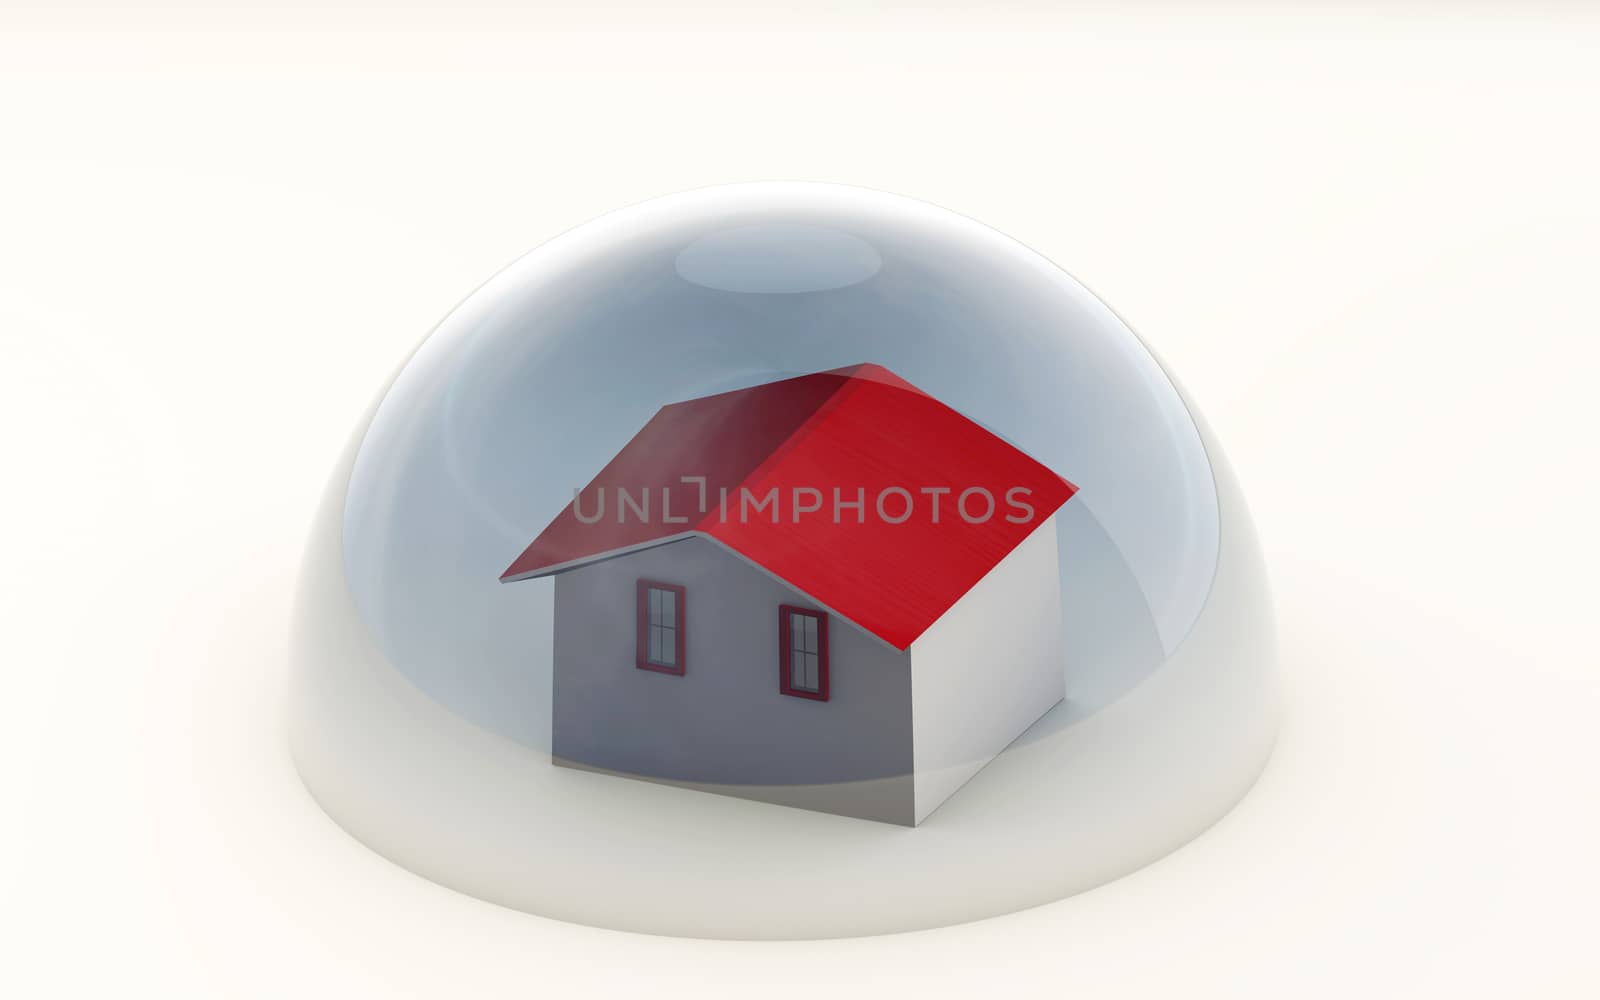 3d rendering of a house protected under a dome by F1b0nacci